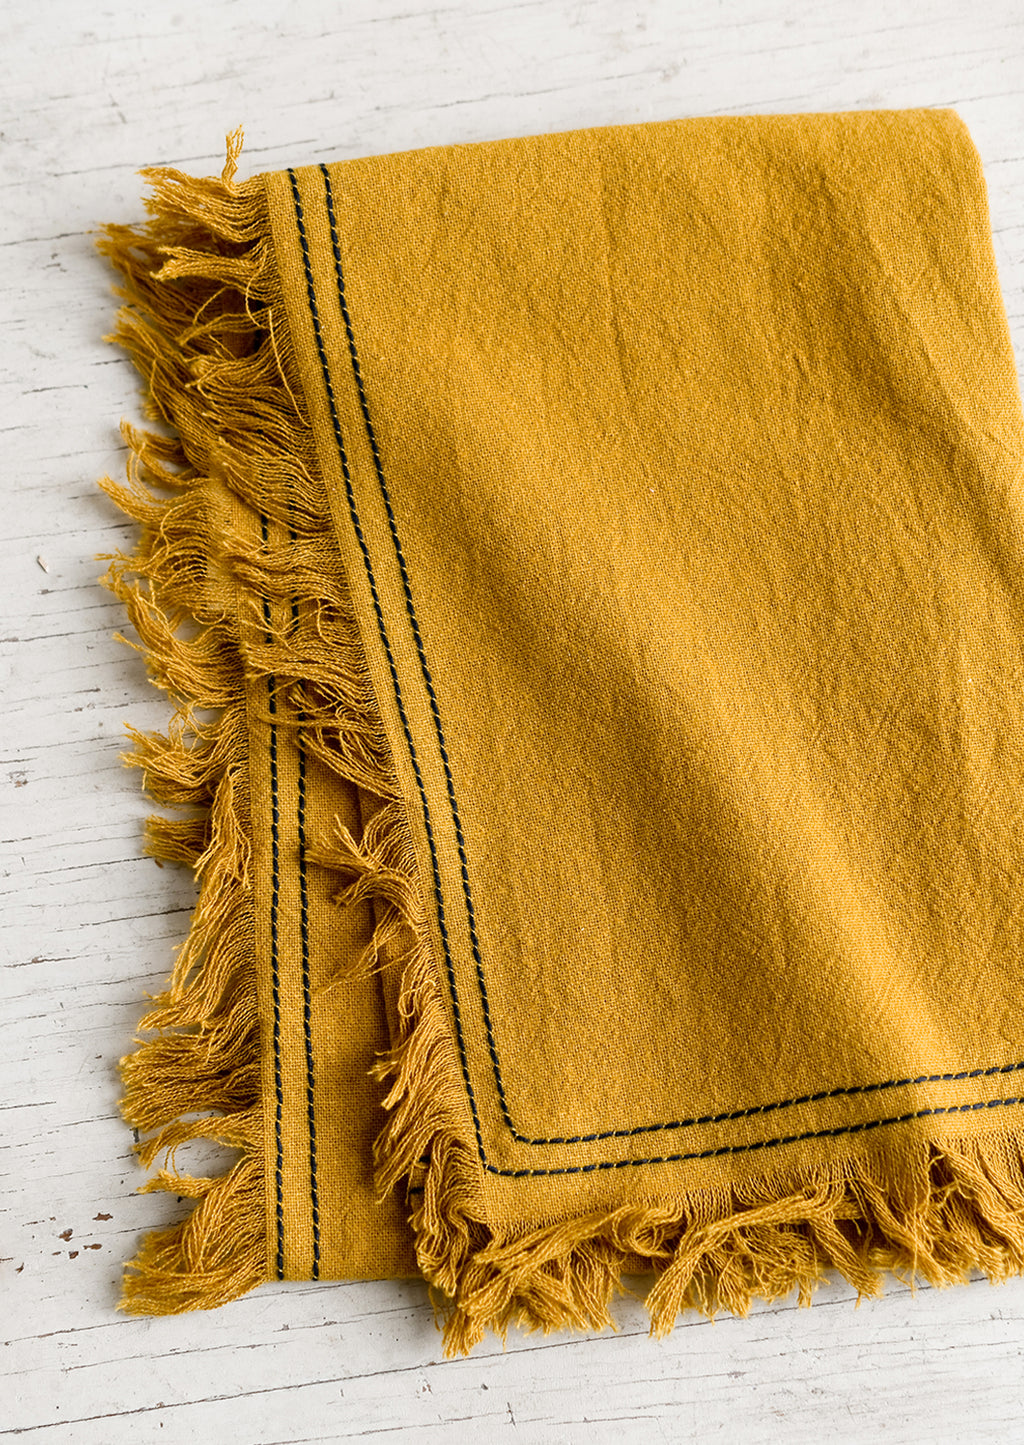 Mustard: A mustard tea towel with navy stitching.